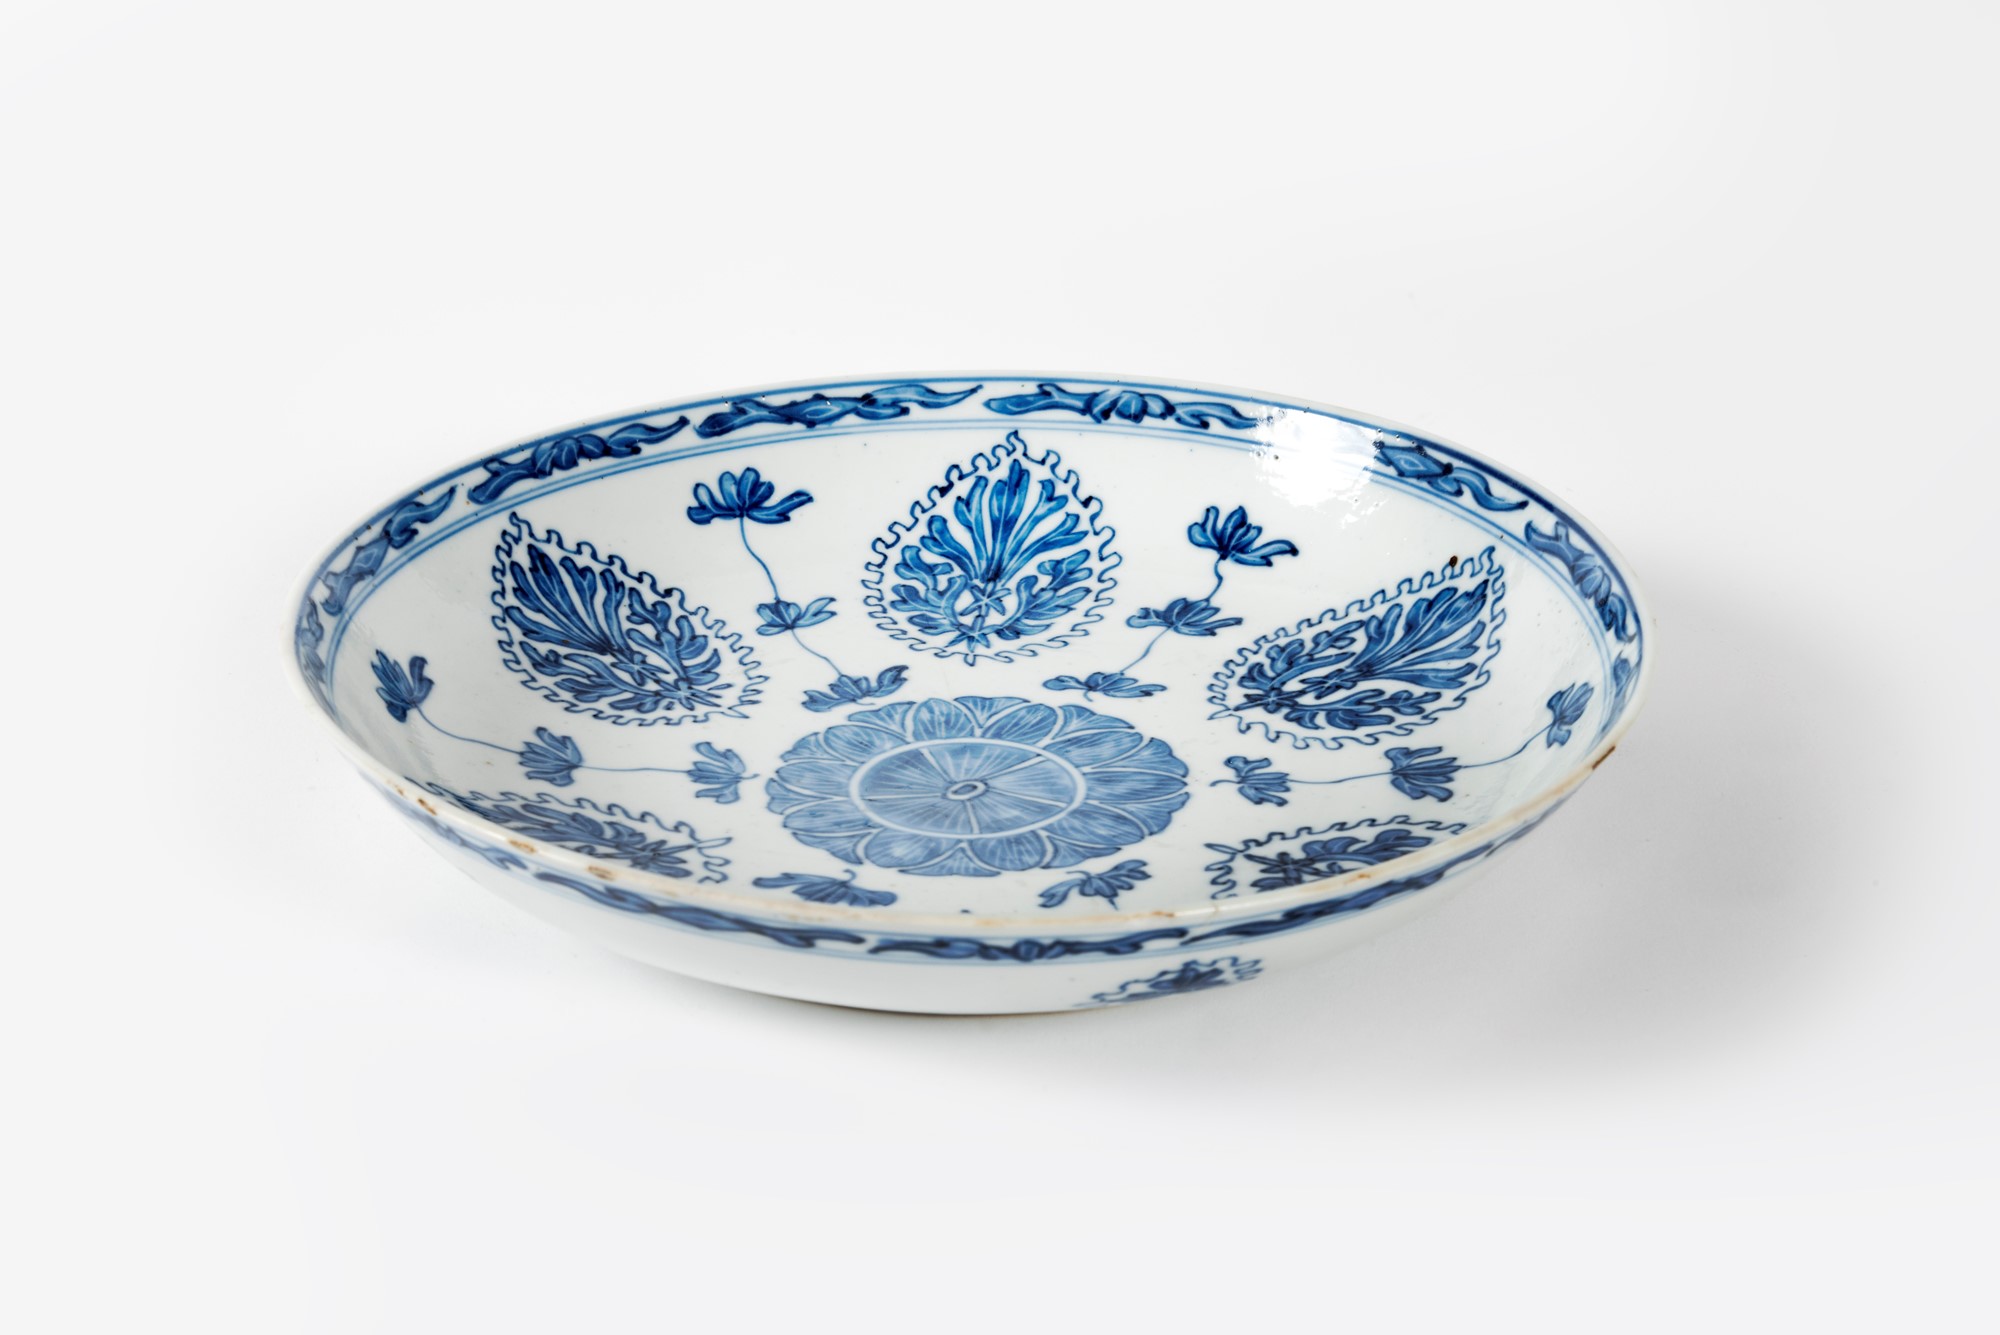 Blue and white porcelain plate, China, Qing dynasty, Kangxi period - Image 3 of 4